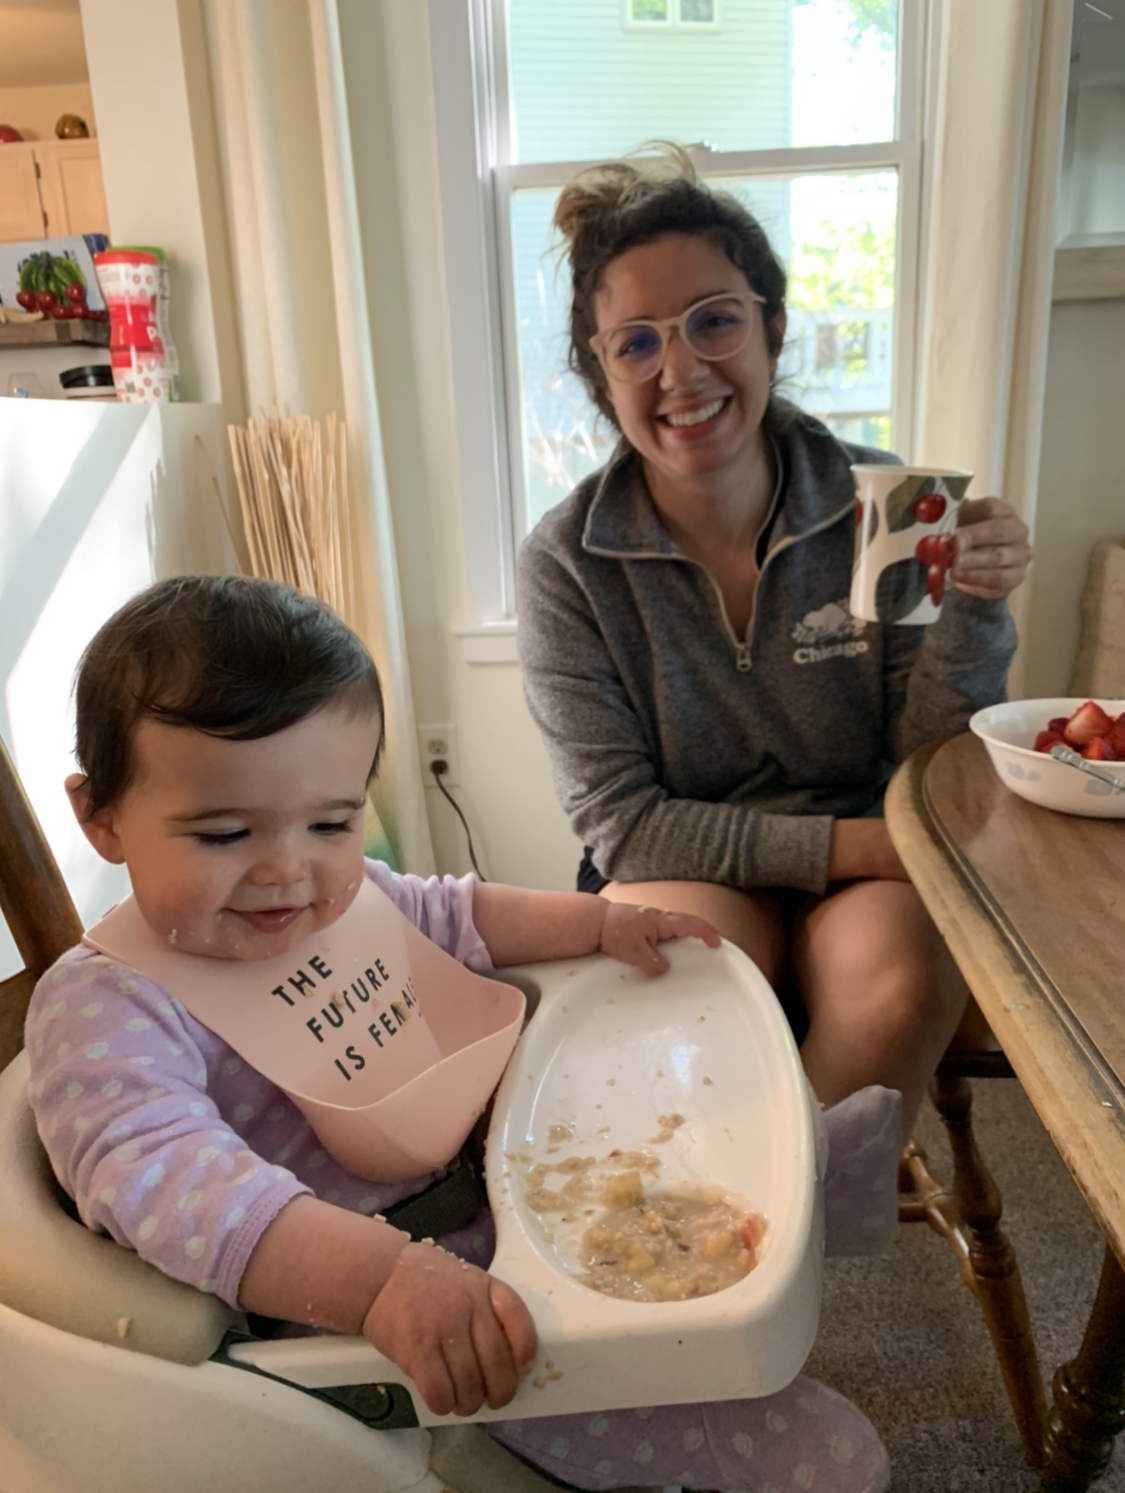 Traverse City by popular Chicago travel blog, Glass of Glam: image of a mom sitting next to her daughter who is sitting in a high chair and eating.